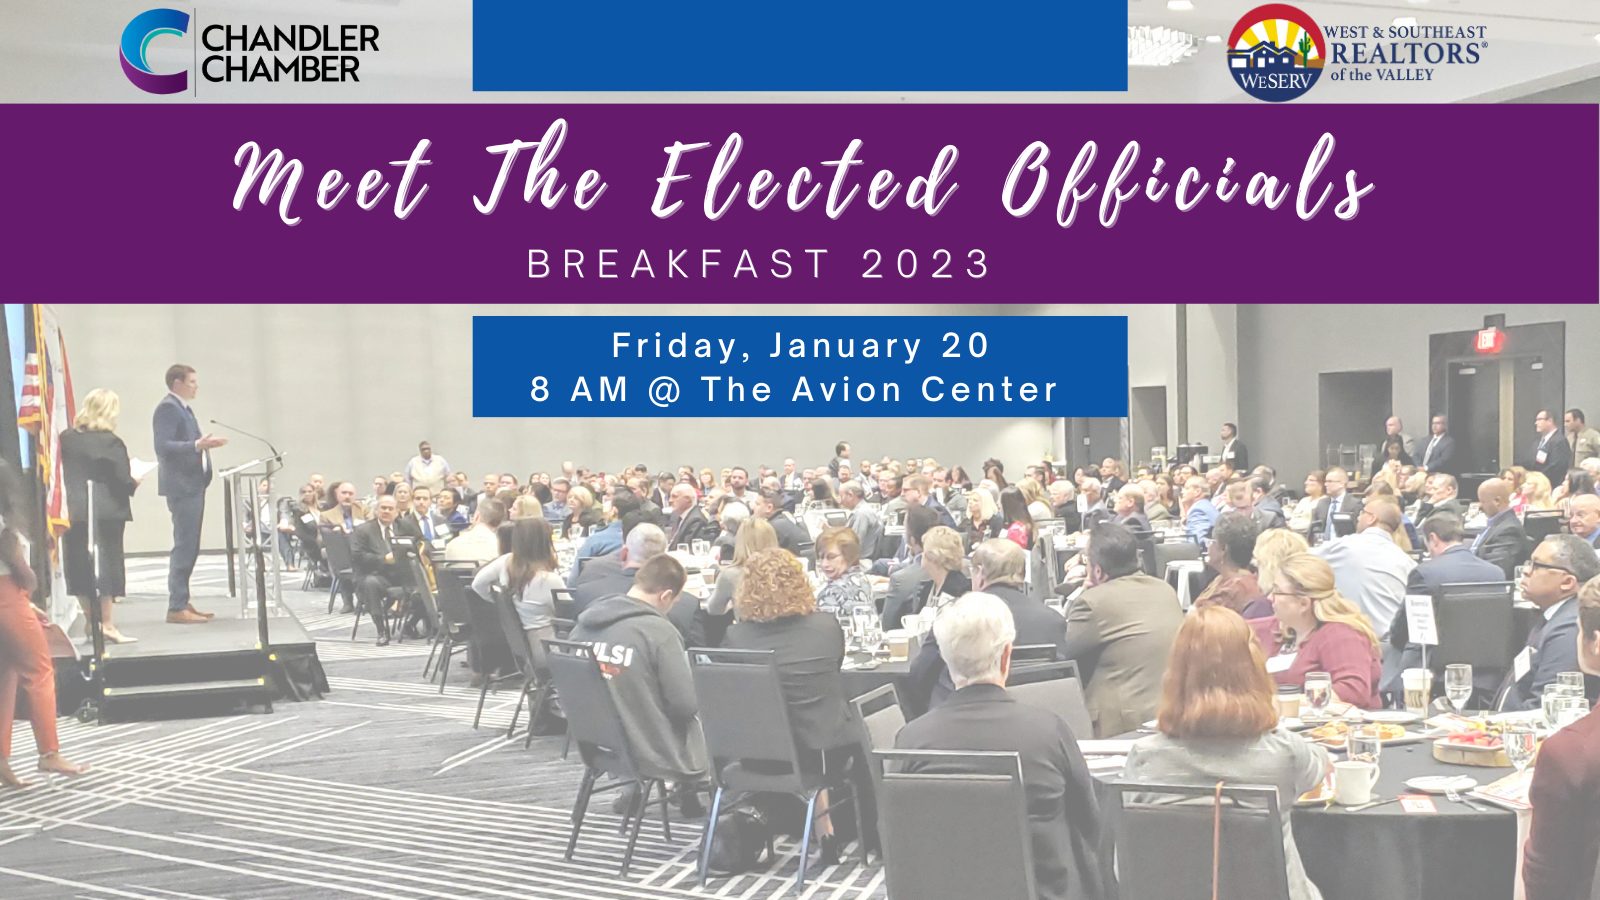 Meet the Elected Officials Breakfast 2023 Chandler Chamber of Commerce Friday January 20 